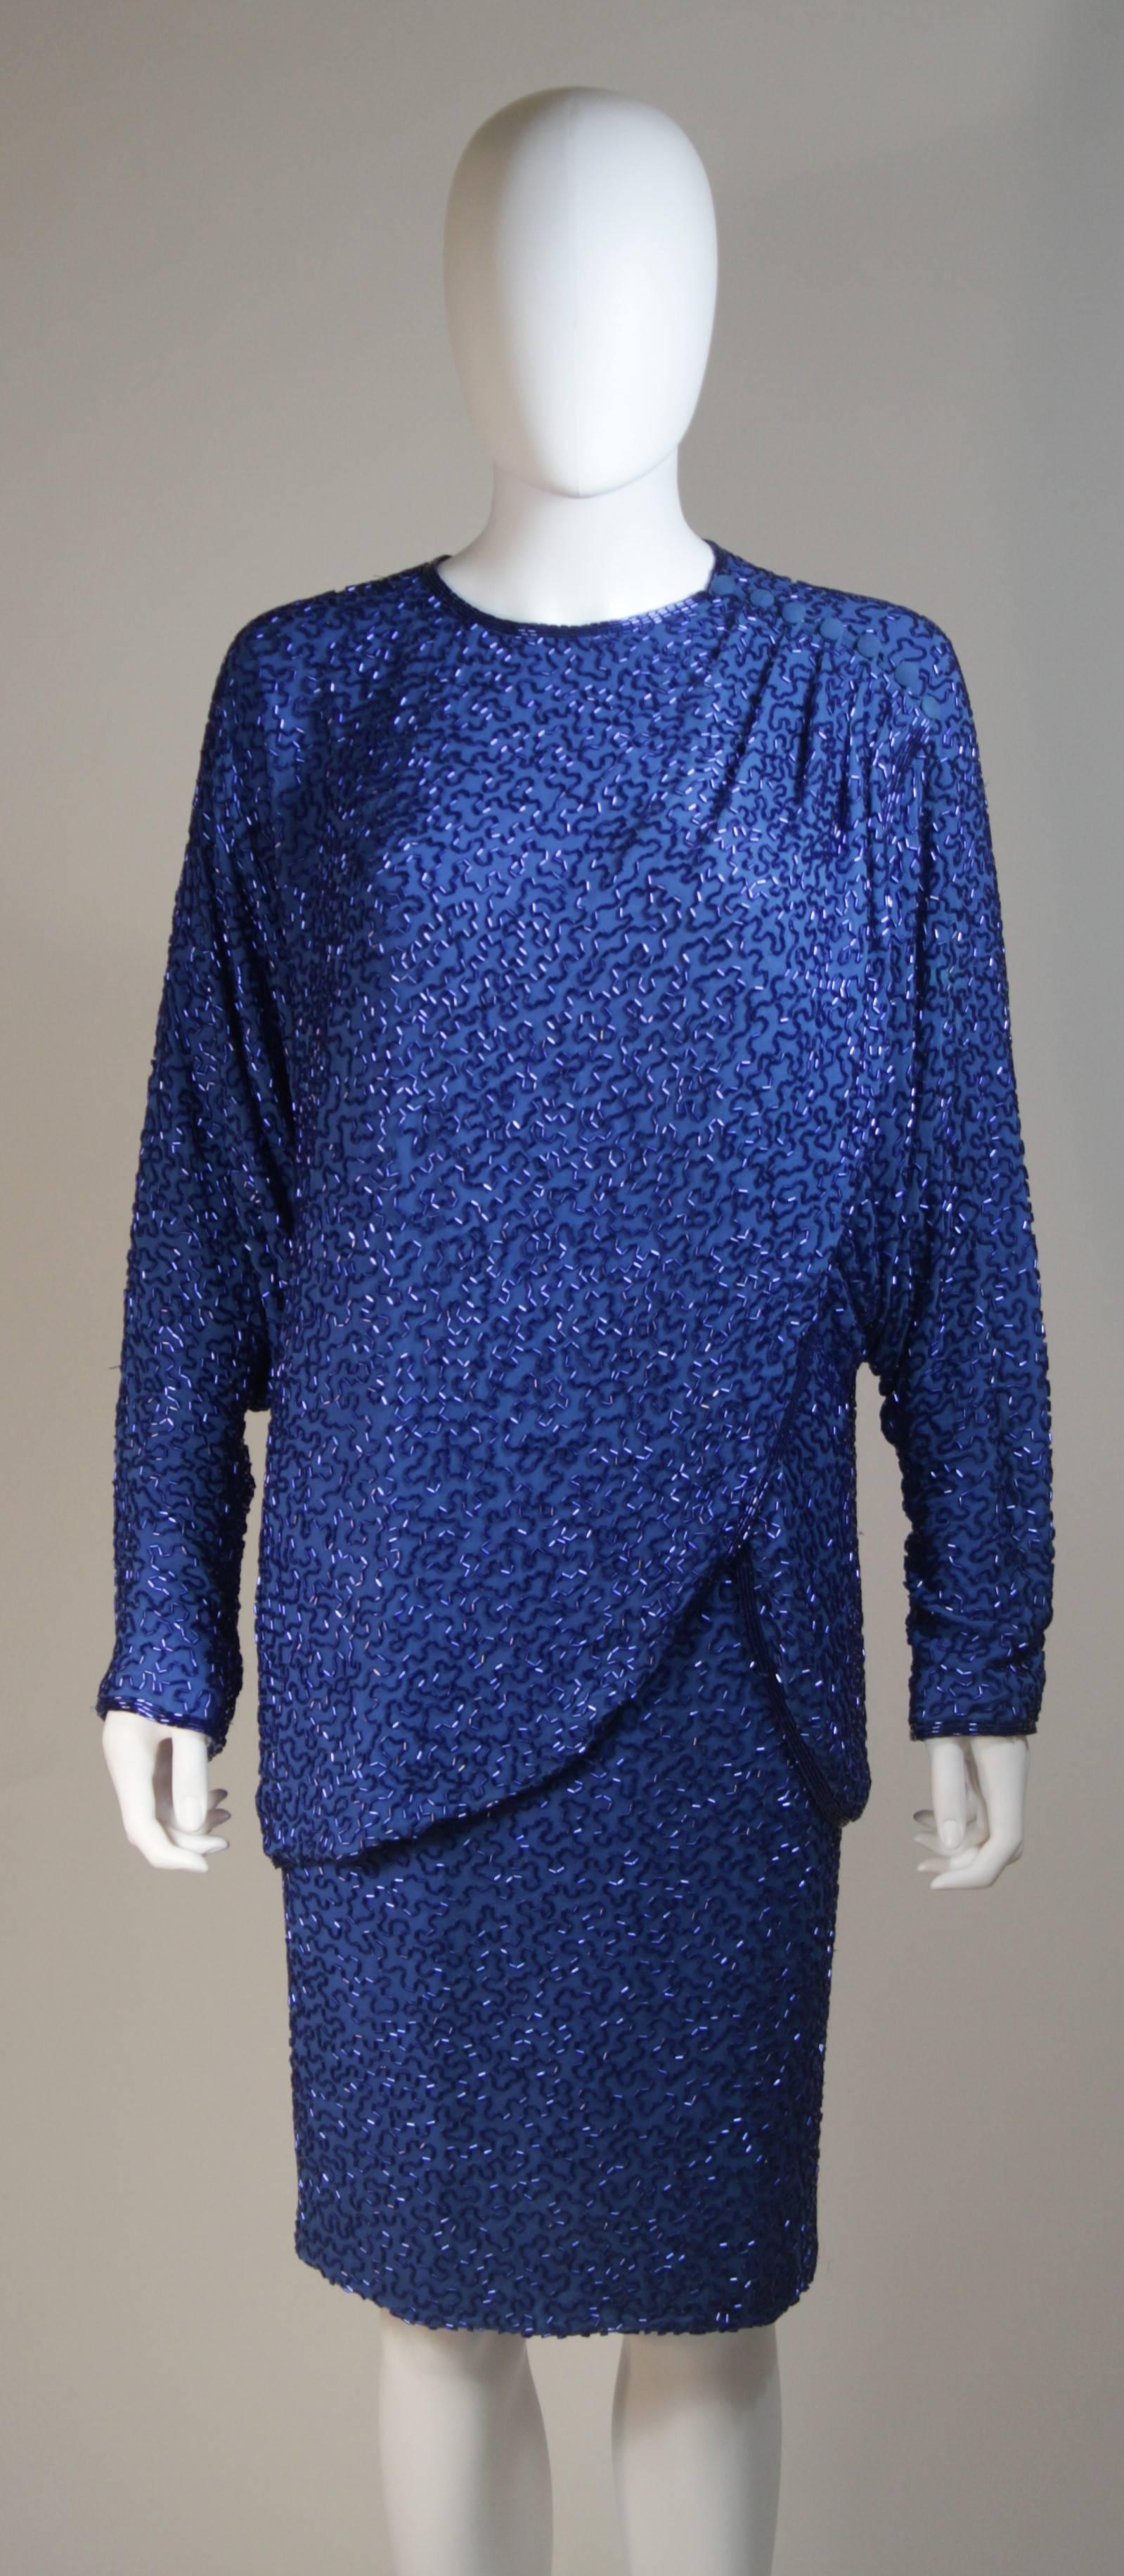 This Stephen Yearik skirt ensemble is composed of a beaded silk in a vibrant blue hue. The top has a draped design and closure at the shoulder. The skirt is a classic pencil silhouette with a zipper closure. In great vintage condition.

  **Please